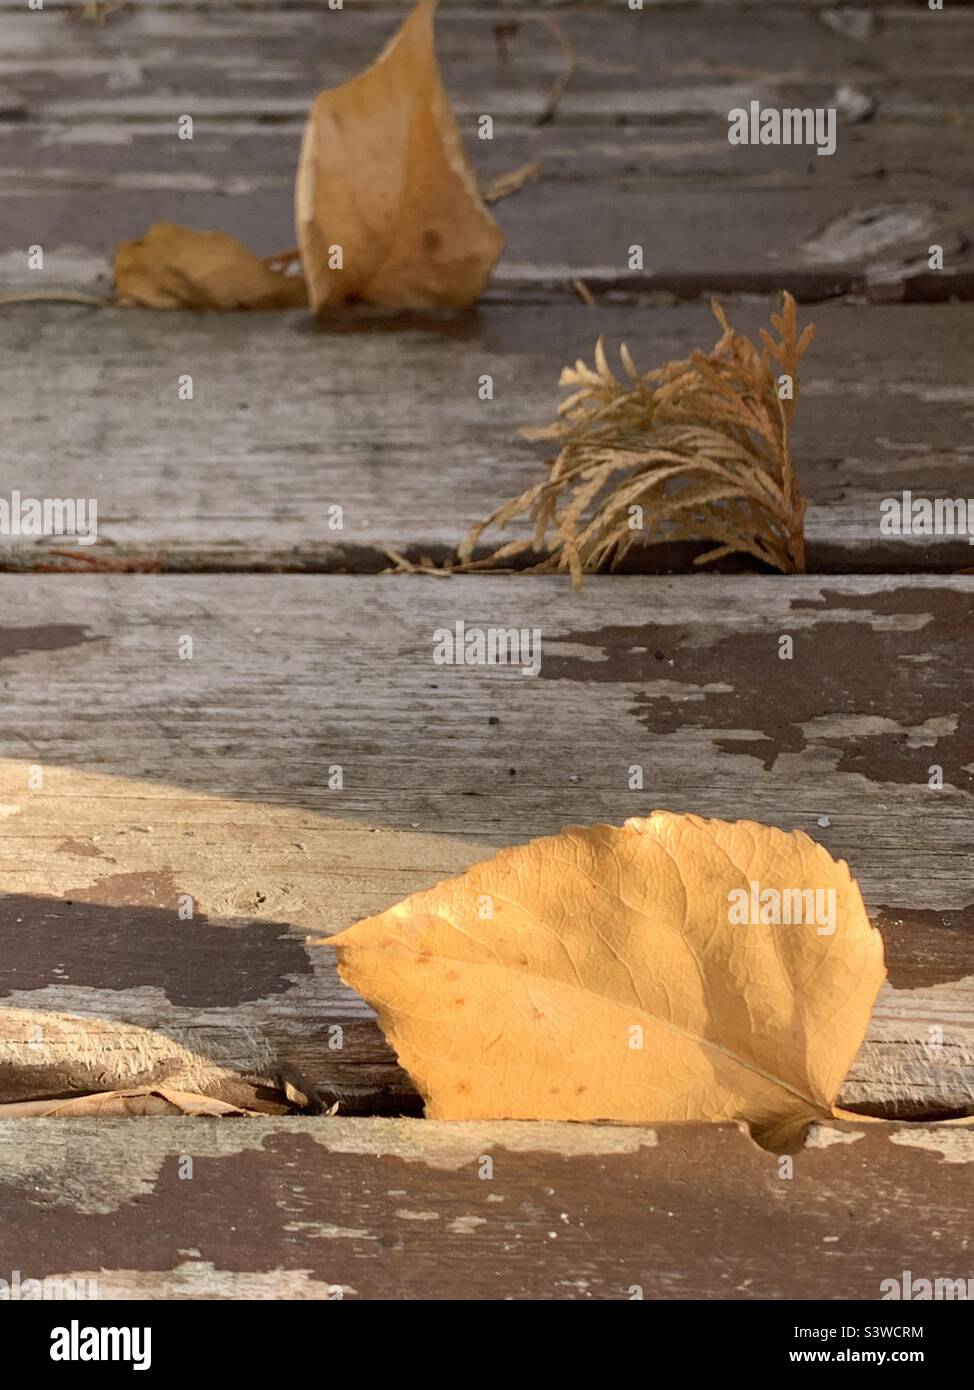 Gold fallen poplar leaf in a shaft of sunlight on a weathered wooden deck Stock Photo